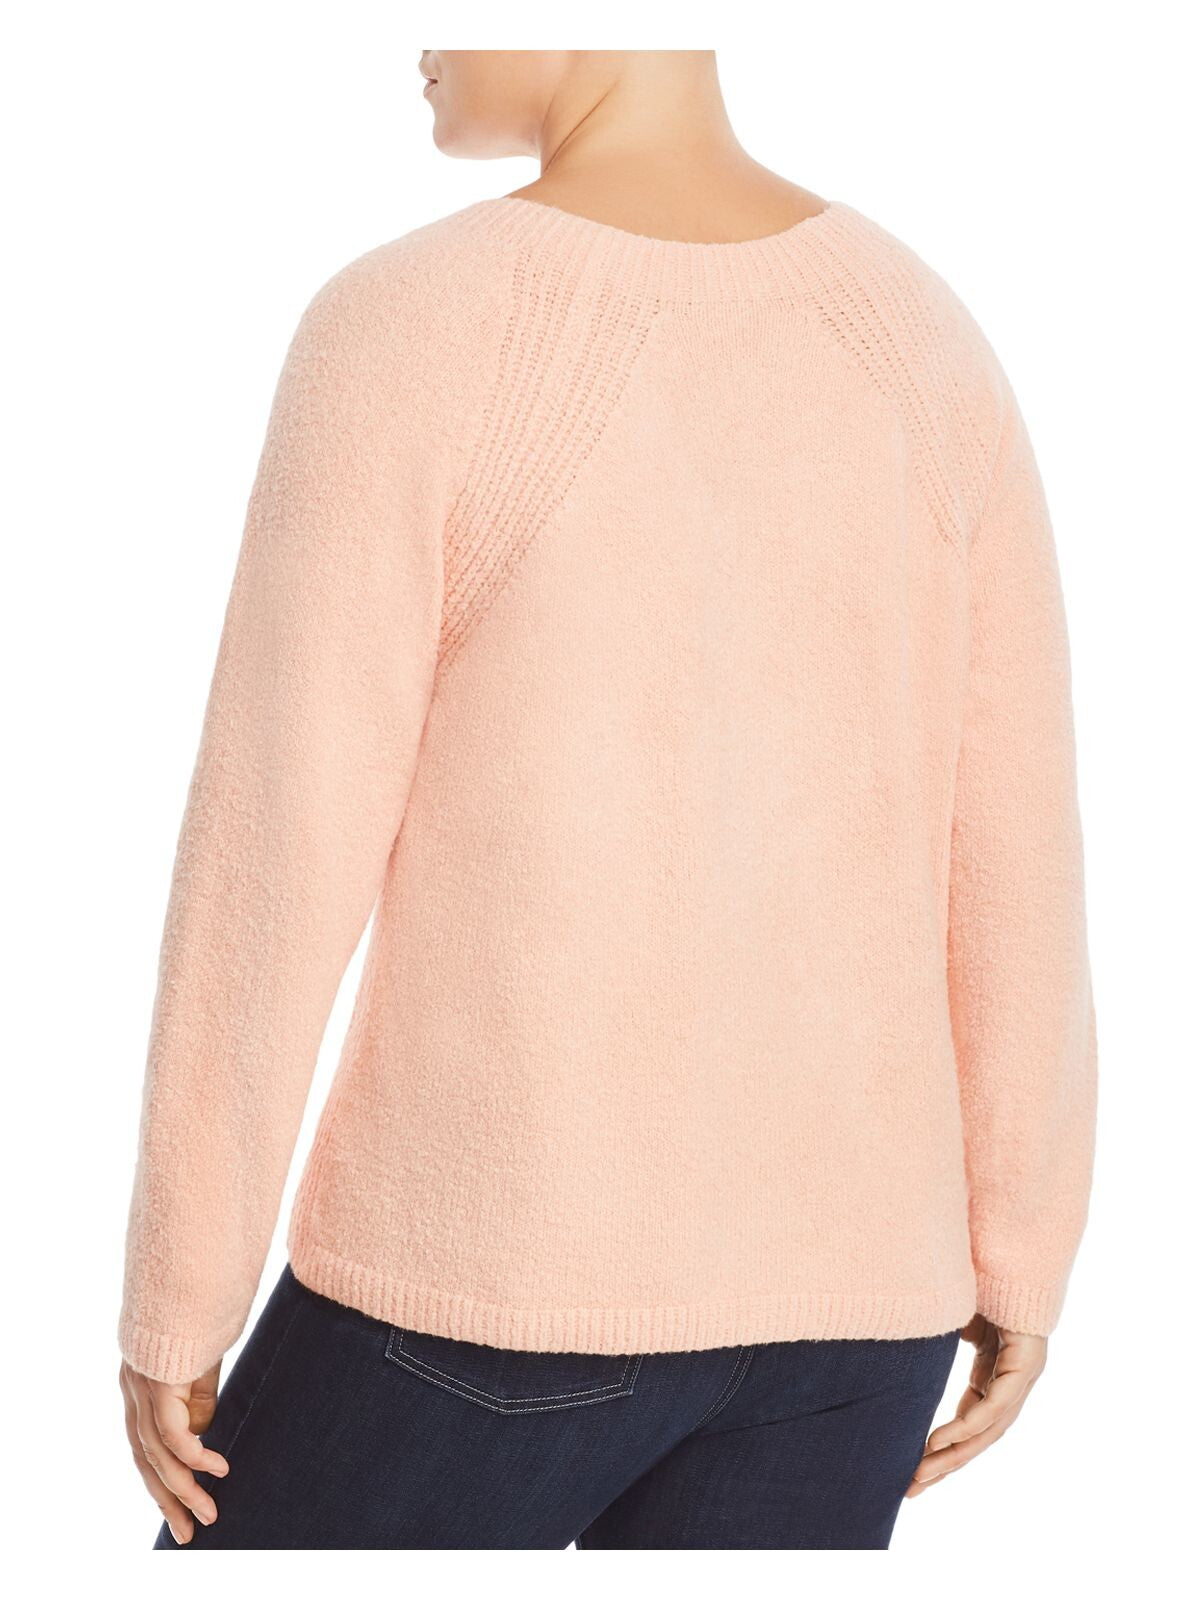 EILEEN FISHER Womens Pink Long Sleeve Crew Neck Sweater Plus 1X